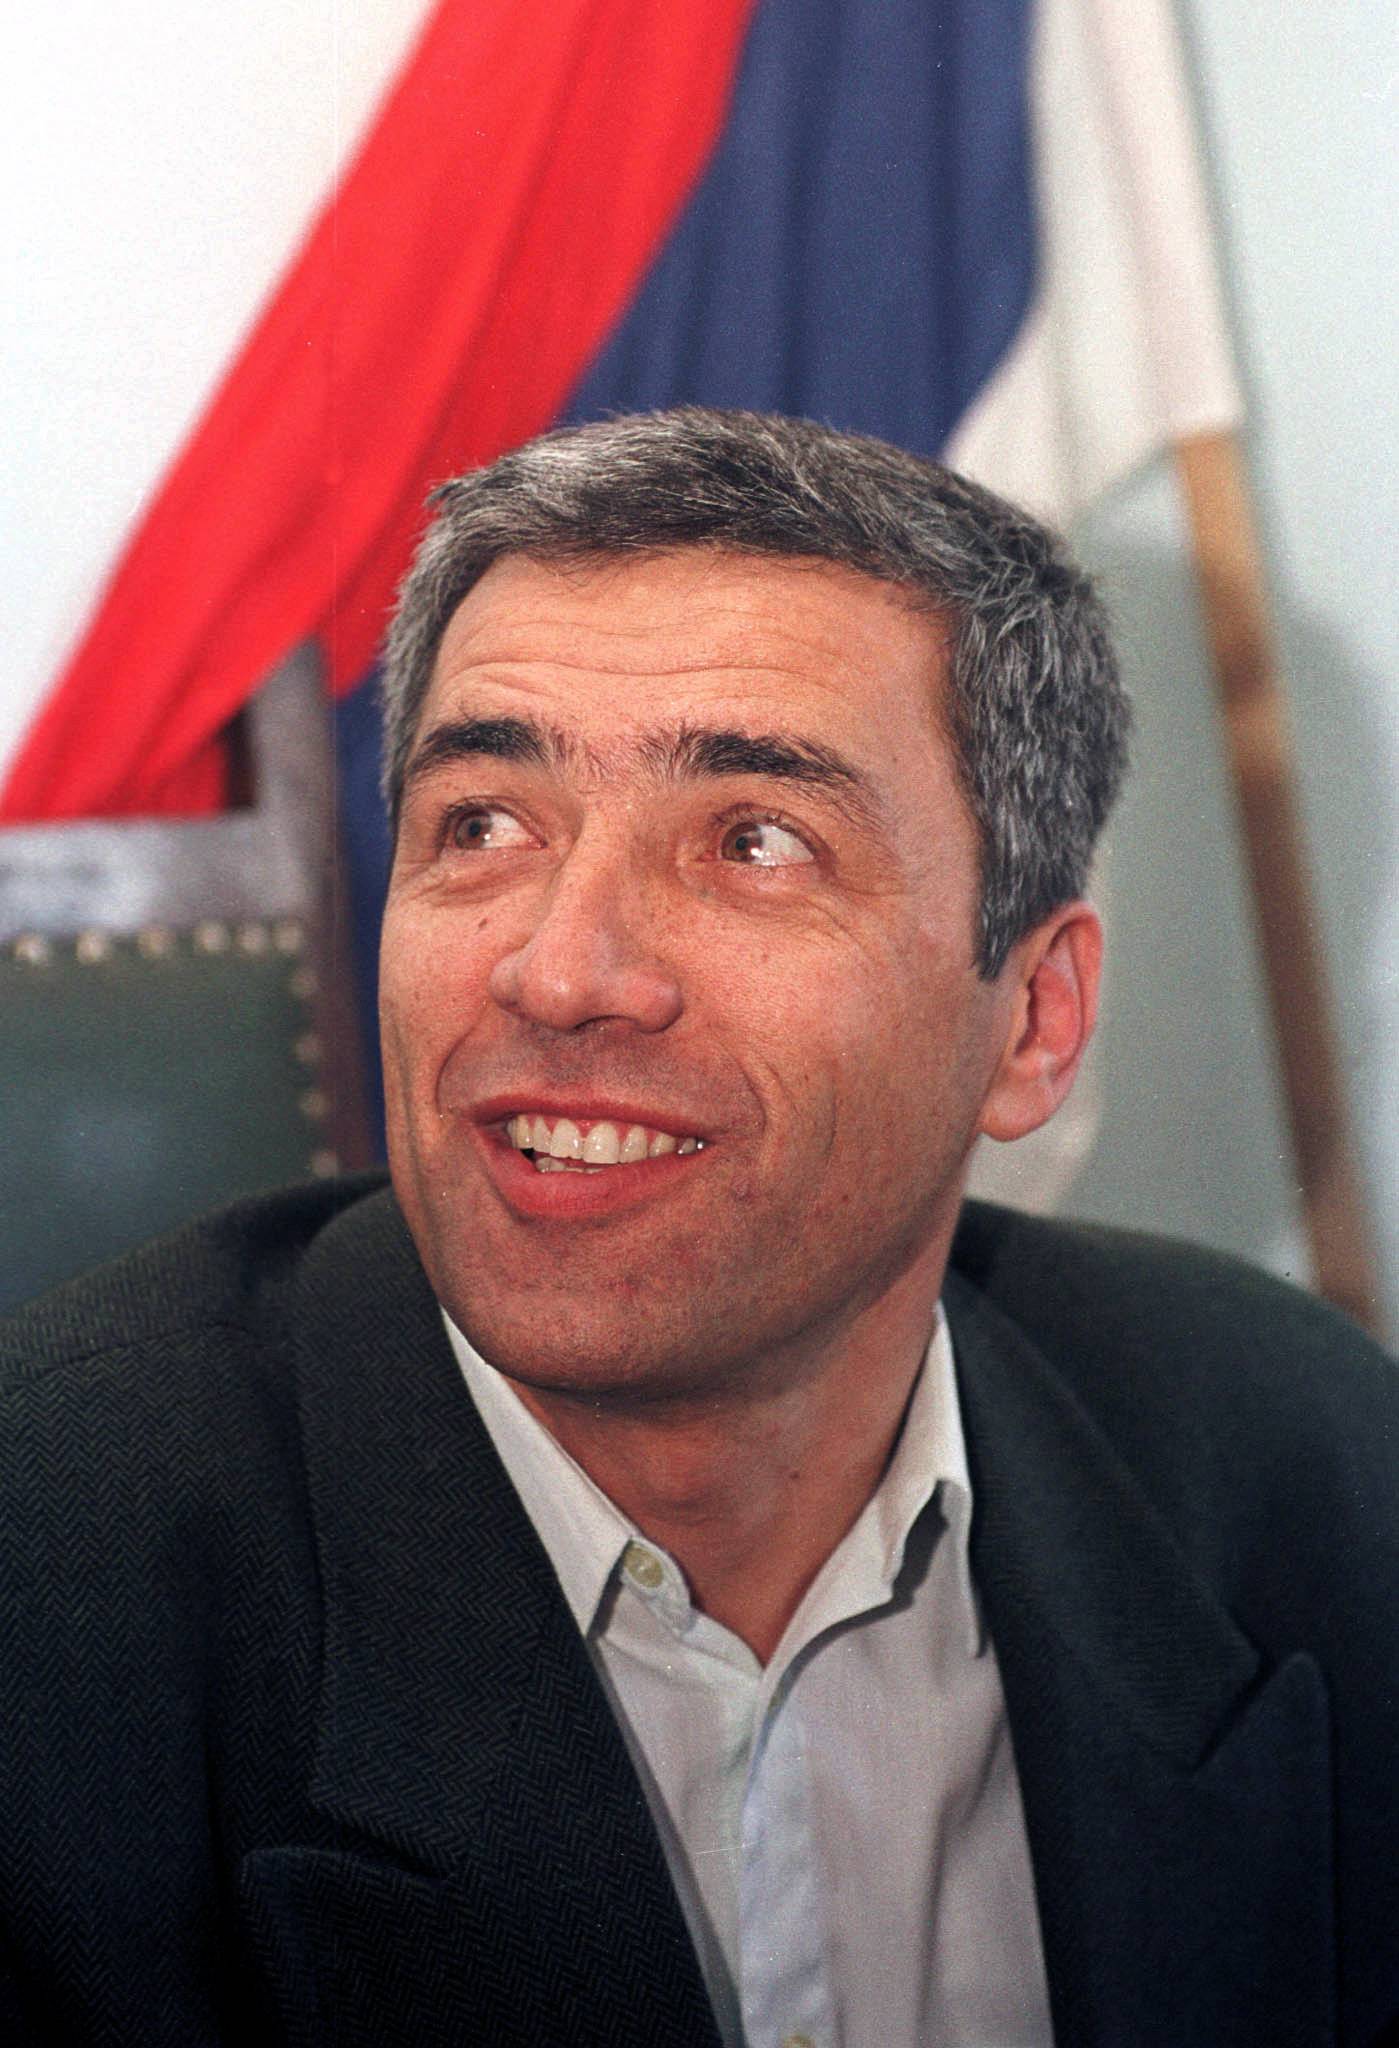 FILE PHOTO - The leader of the Serb community Oliver Ivanovic smiles as he speaks to the press in his office in Mitrovica